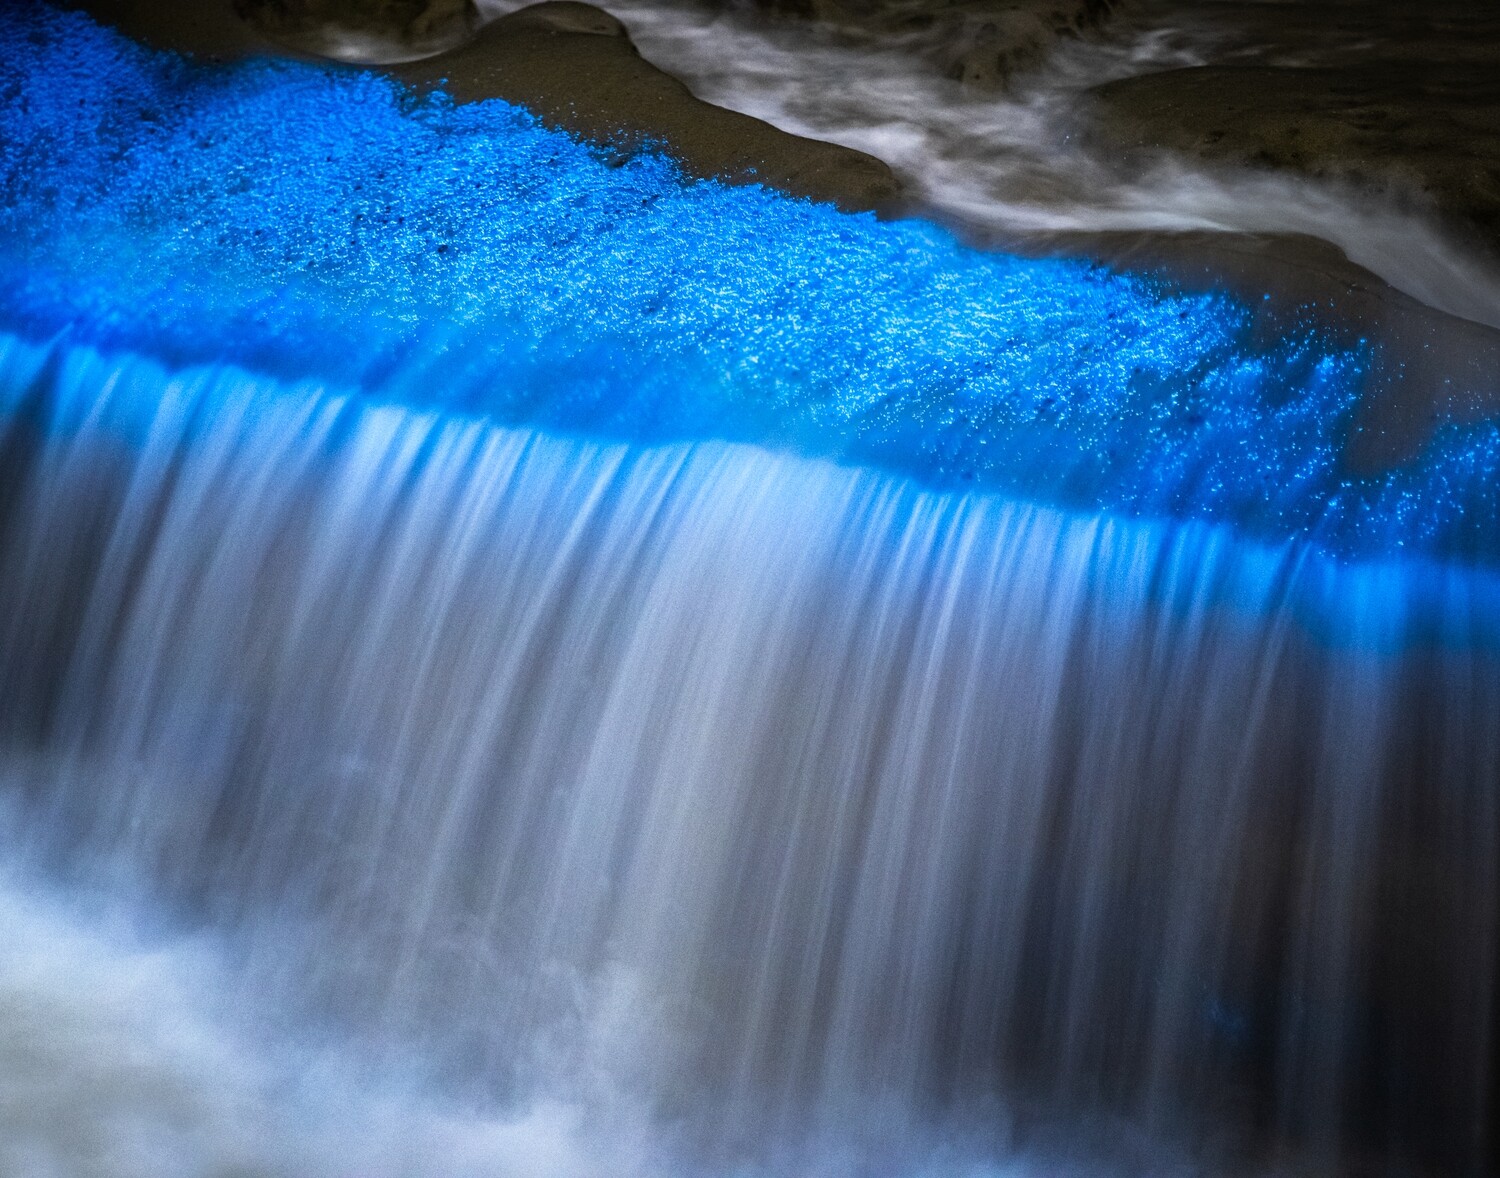 Signed Print | "Sparkling Blue Waterfall"